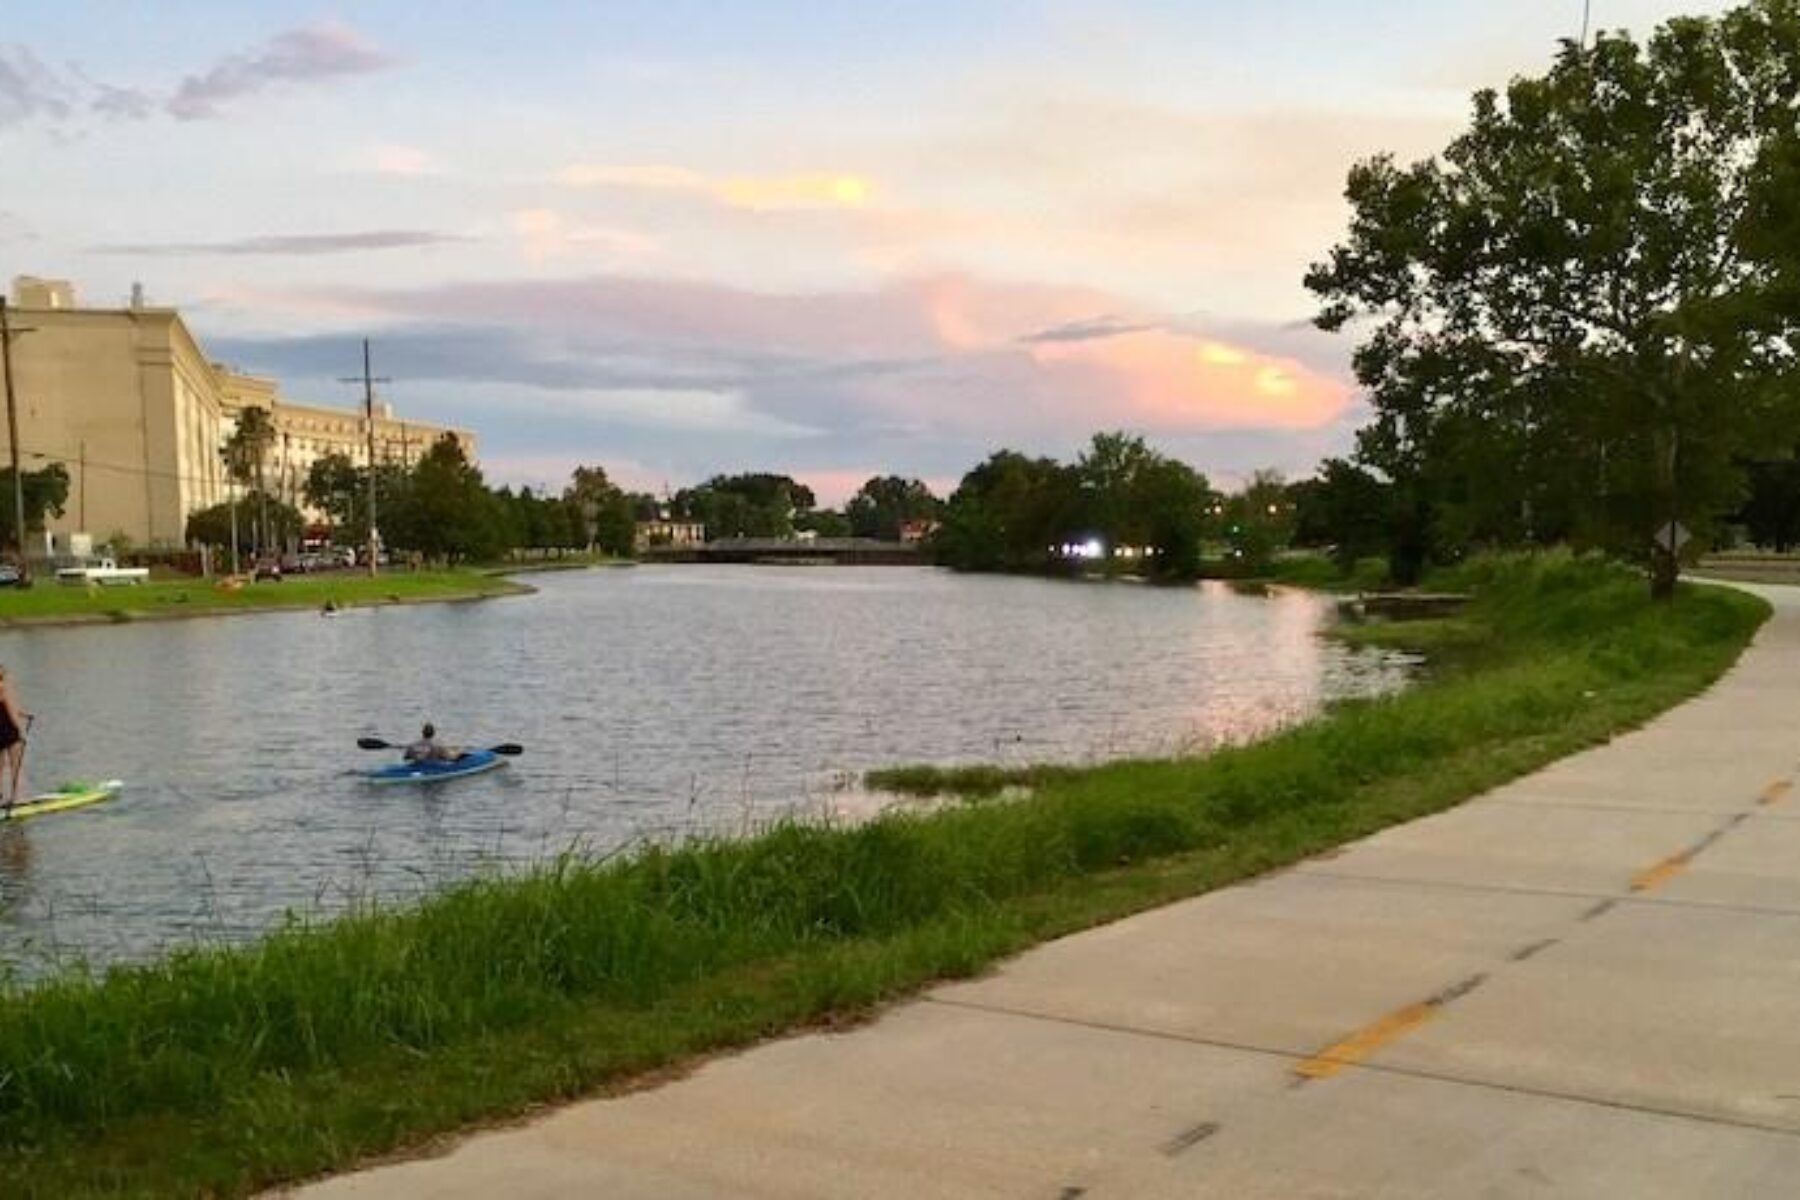 Part of the developing Louisiana Bootlace Trail Network, New Orleans’ Wisner Trail is nestled between two popular recreational amenities - City Park and Bayou St. John. Photo by Jennifer Ruley, courtesy City of New Orleans.